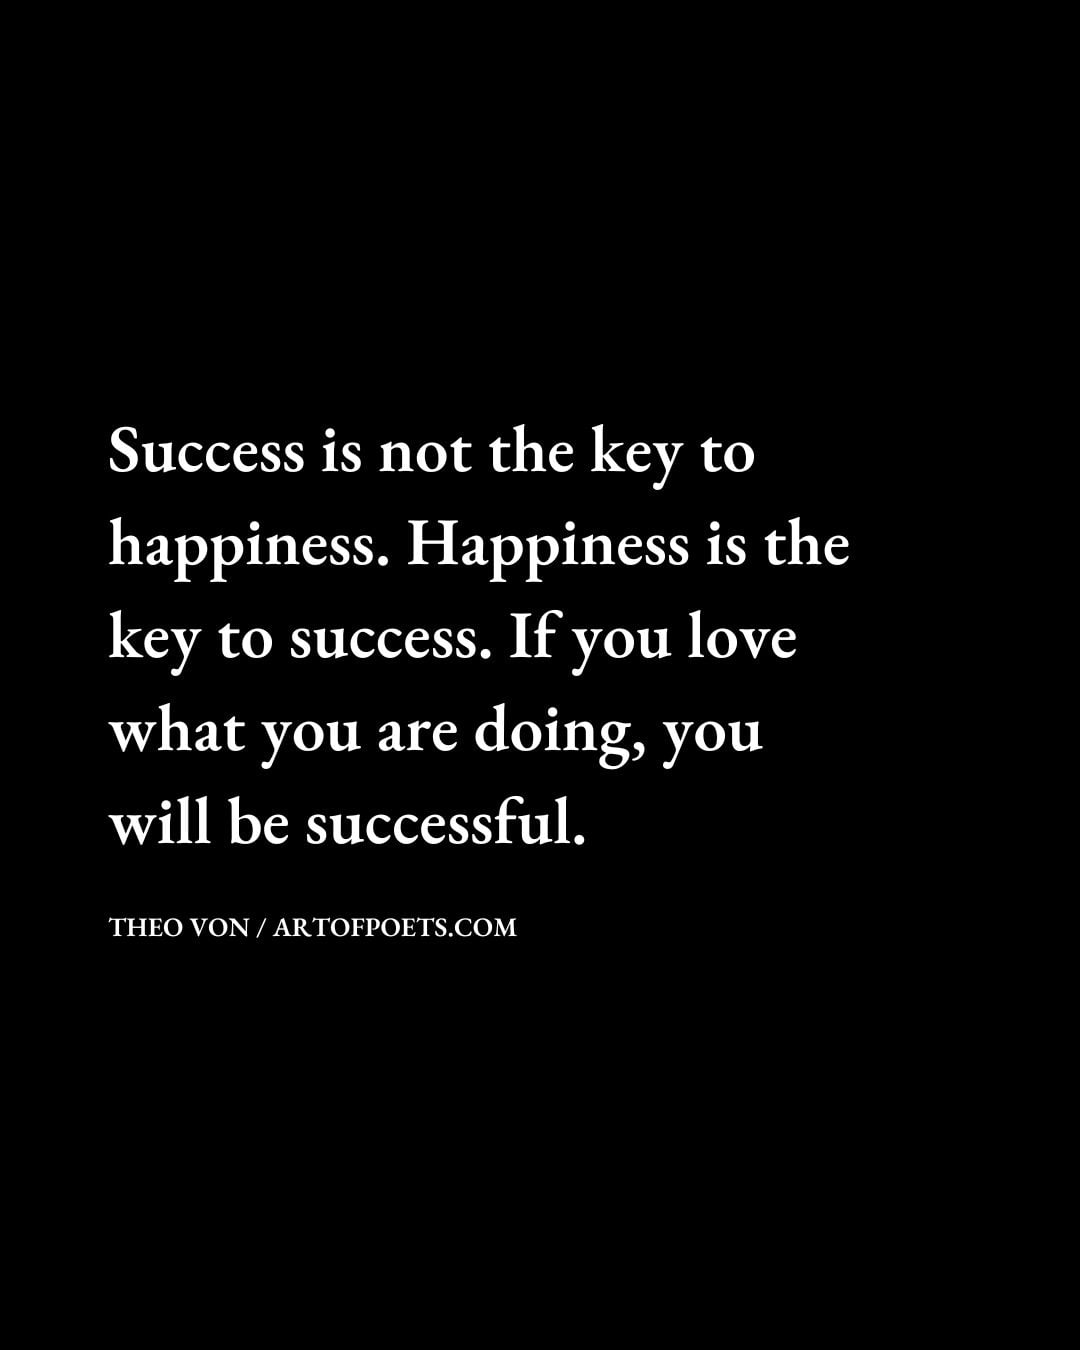 Success is not the key to happiness. Happiness is the key to success. If you love what you are doing you will be successful